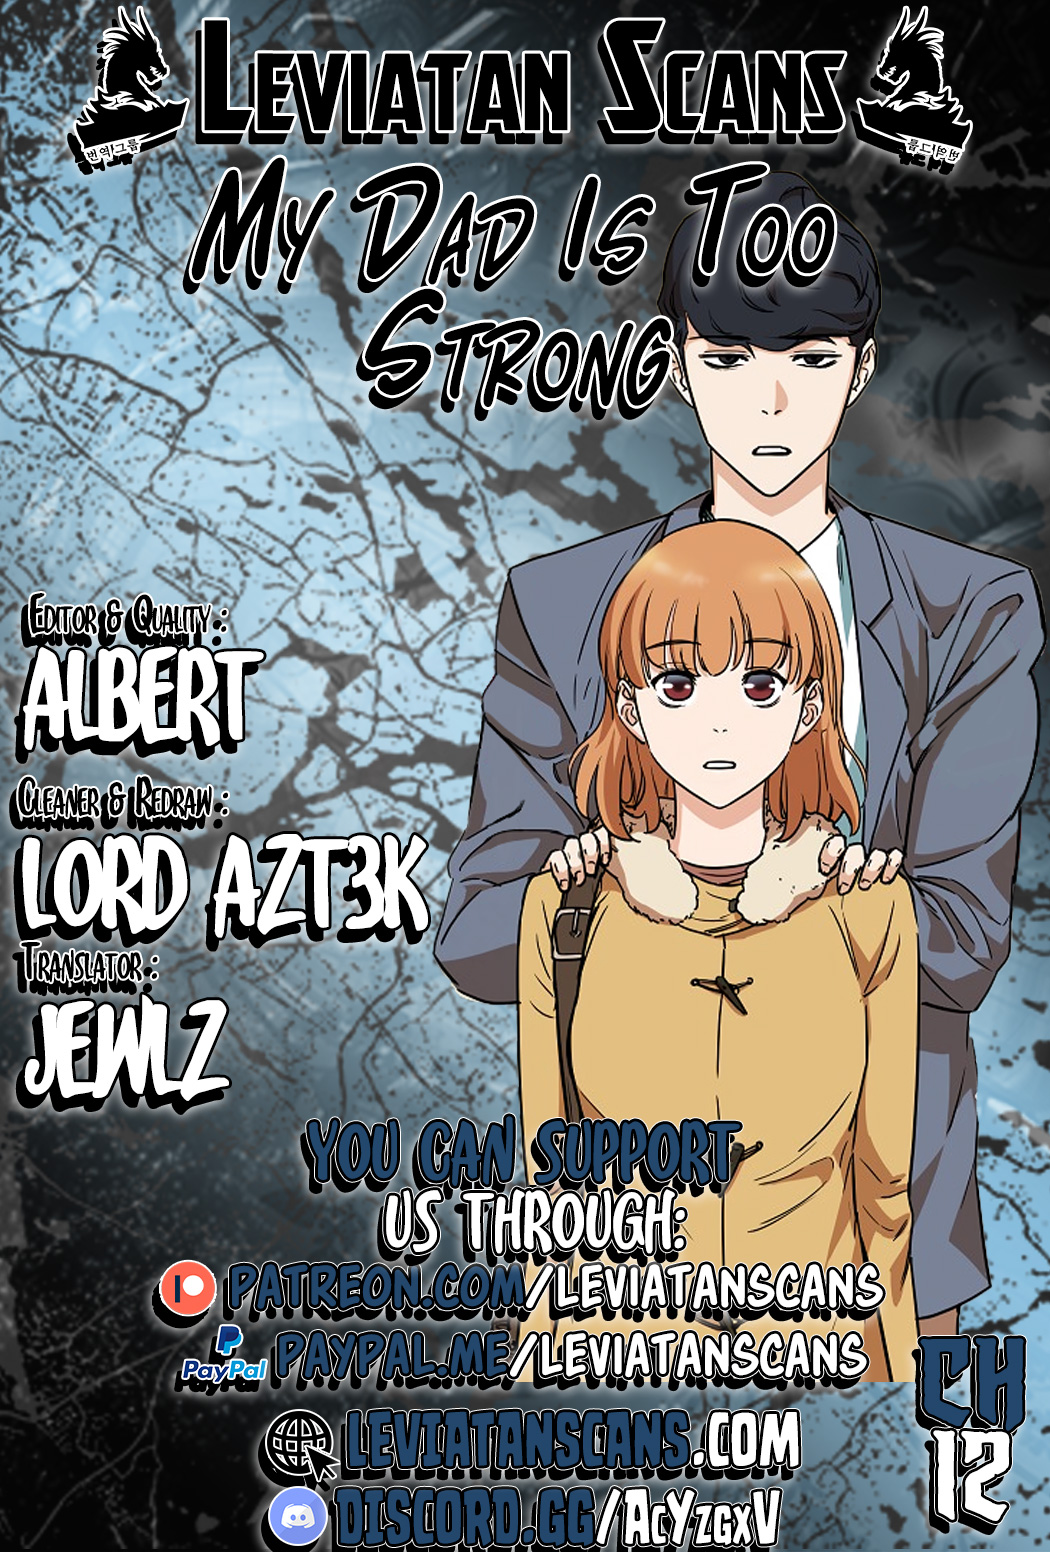 My Dad is Too Strong - Chapter 2591 - Image 1